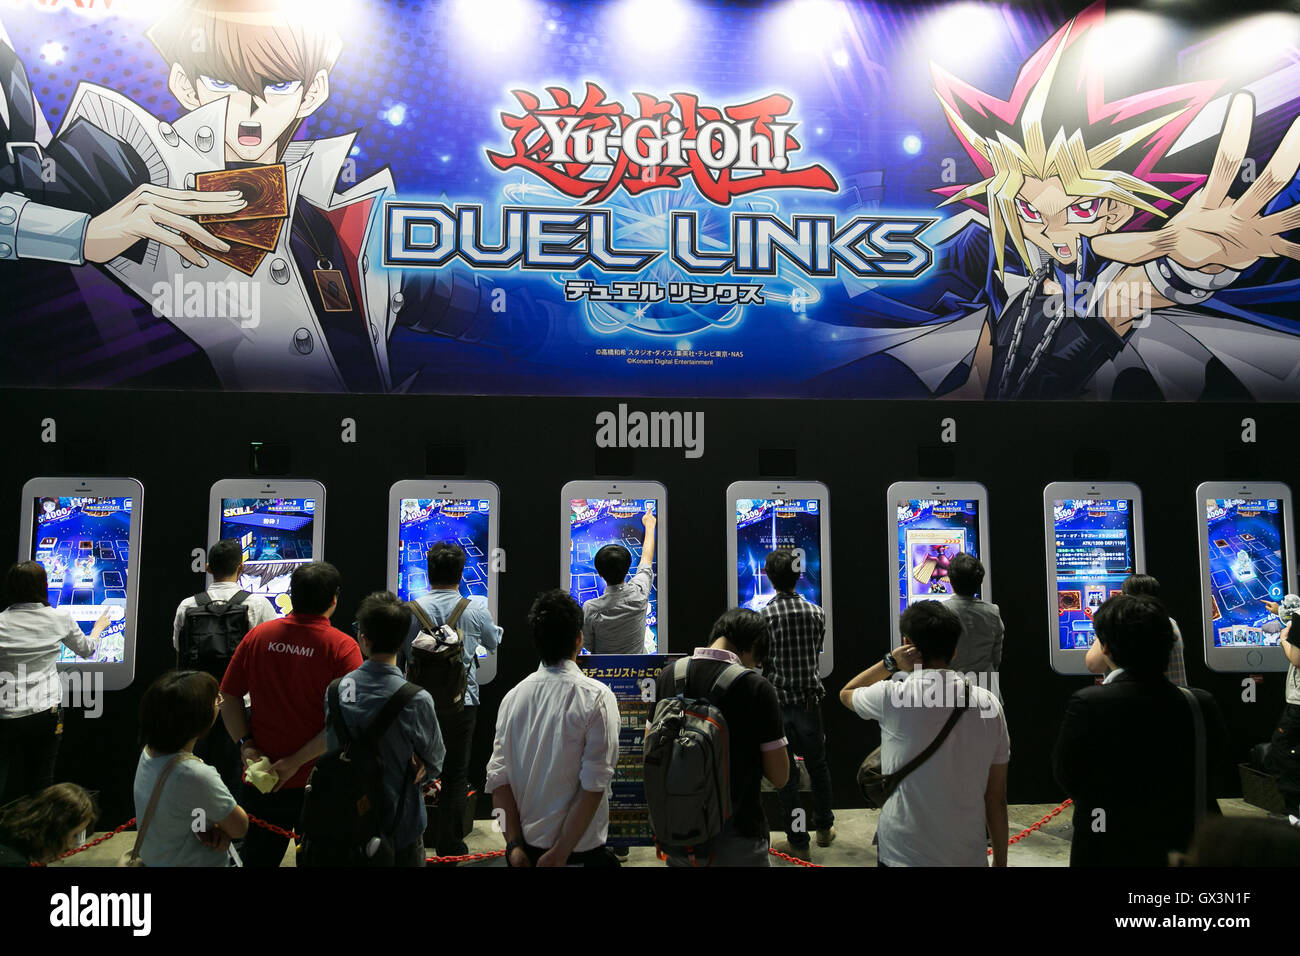 Tokyo, Japan. 16th September, 2016. Visitors line up to play Yu-Gi-Oh! video game at the Tokyo Game Show on September 16, 2016, Chiba, Japan. The 20th anniversary show has added a new Virtual Reality (VR) area where 35 companies will exhibit. The event which calls itself the hub of the global video game market is hosting 614 exhibitors from 37 different countries and runs from September 15 to 18 at the International Convention Complex Makuhari Messe in Chiba. 1,523 game titles for smartphones, games consoles, PC and VR platforms are on show.  Stock Photo